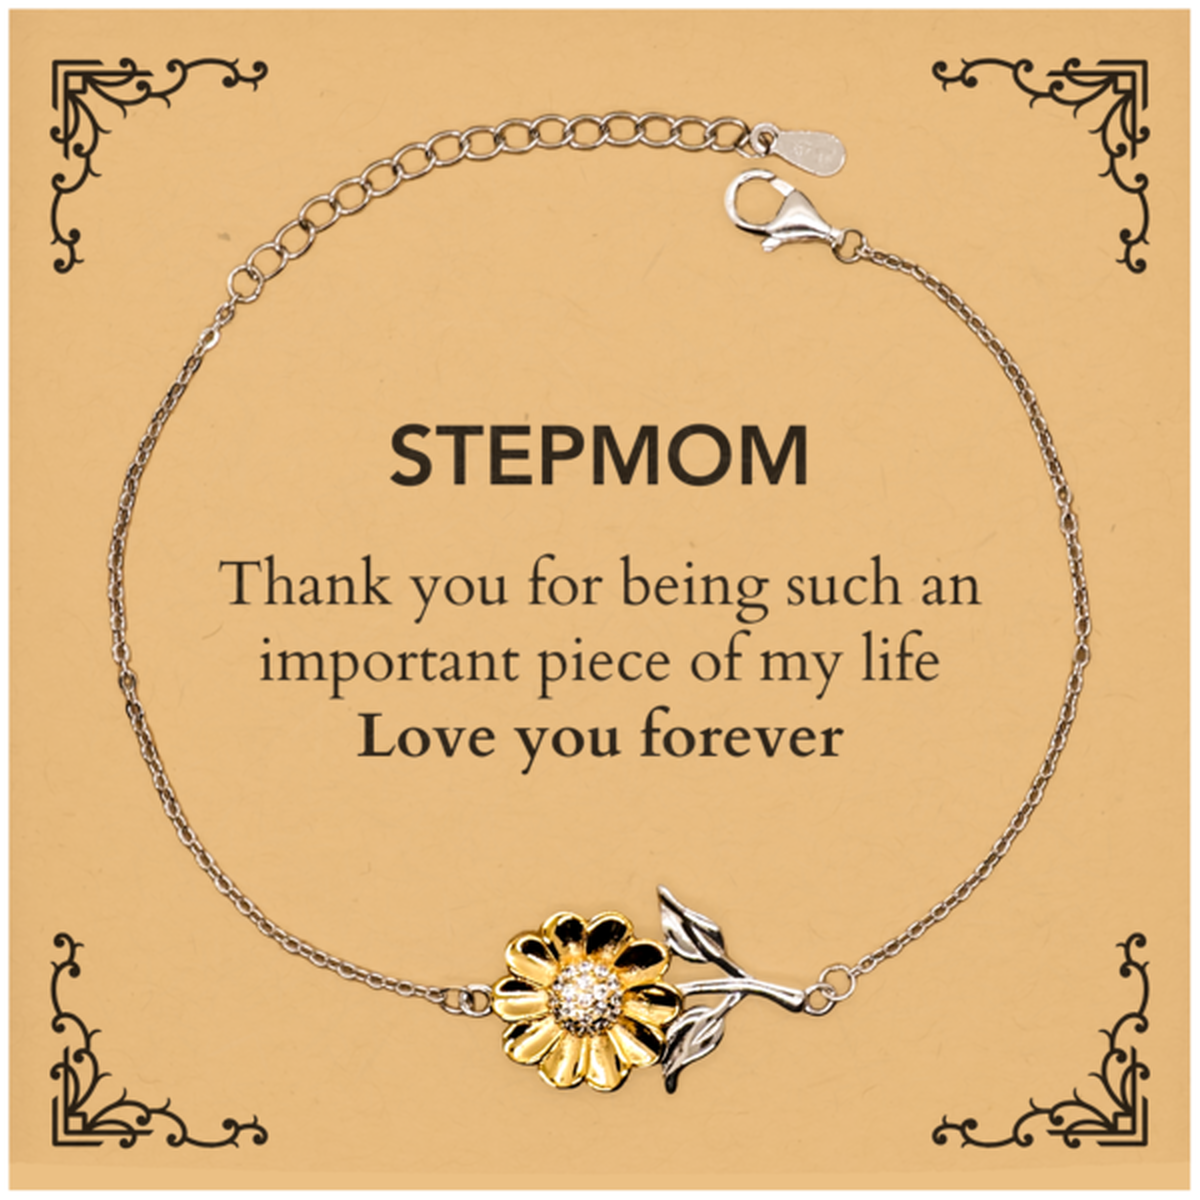 Appropriate Stepmom Sunflower Bracelet Epic Birthday Gifts for Stepmom Thank you for being such an important piece of my life Stepmom Christmas Mothers Fathers Day